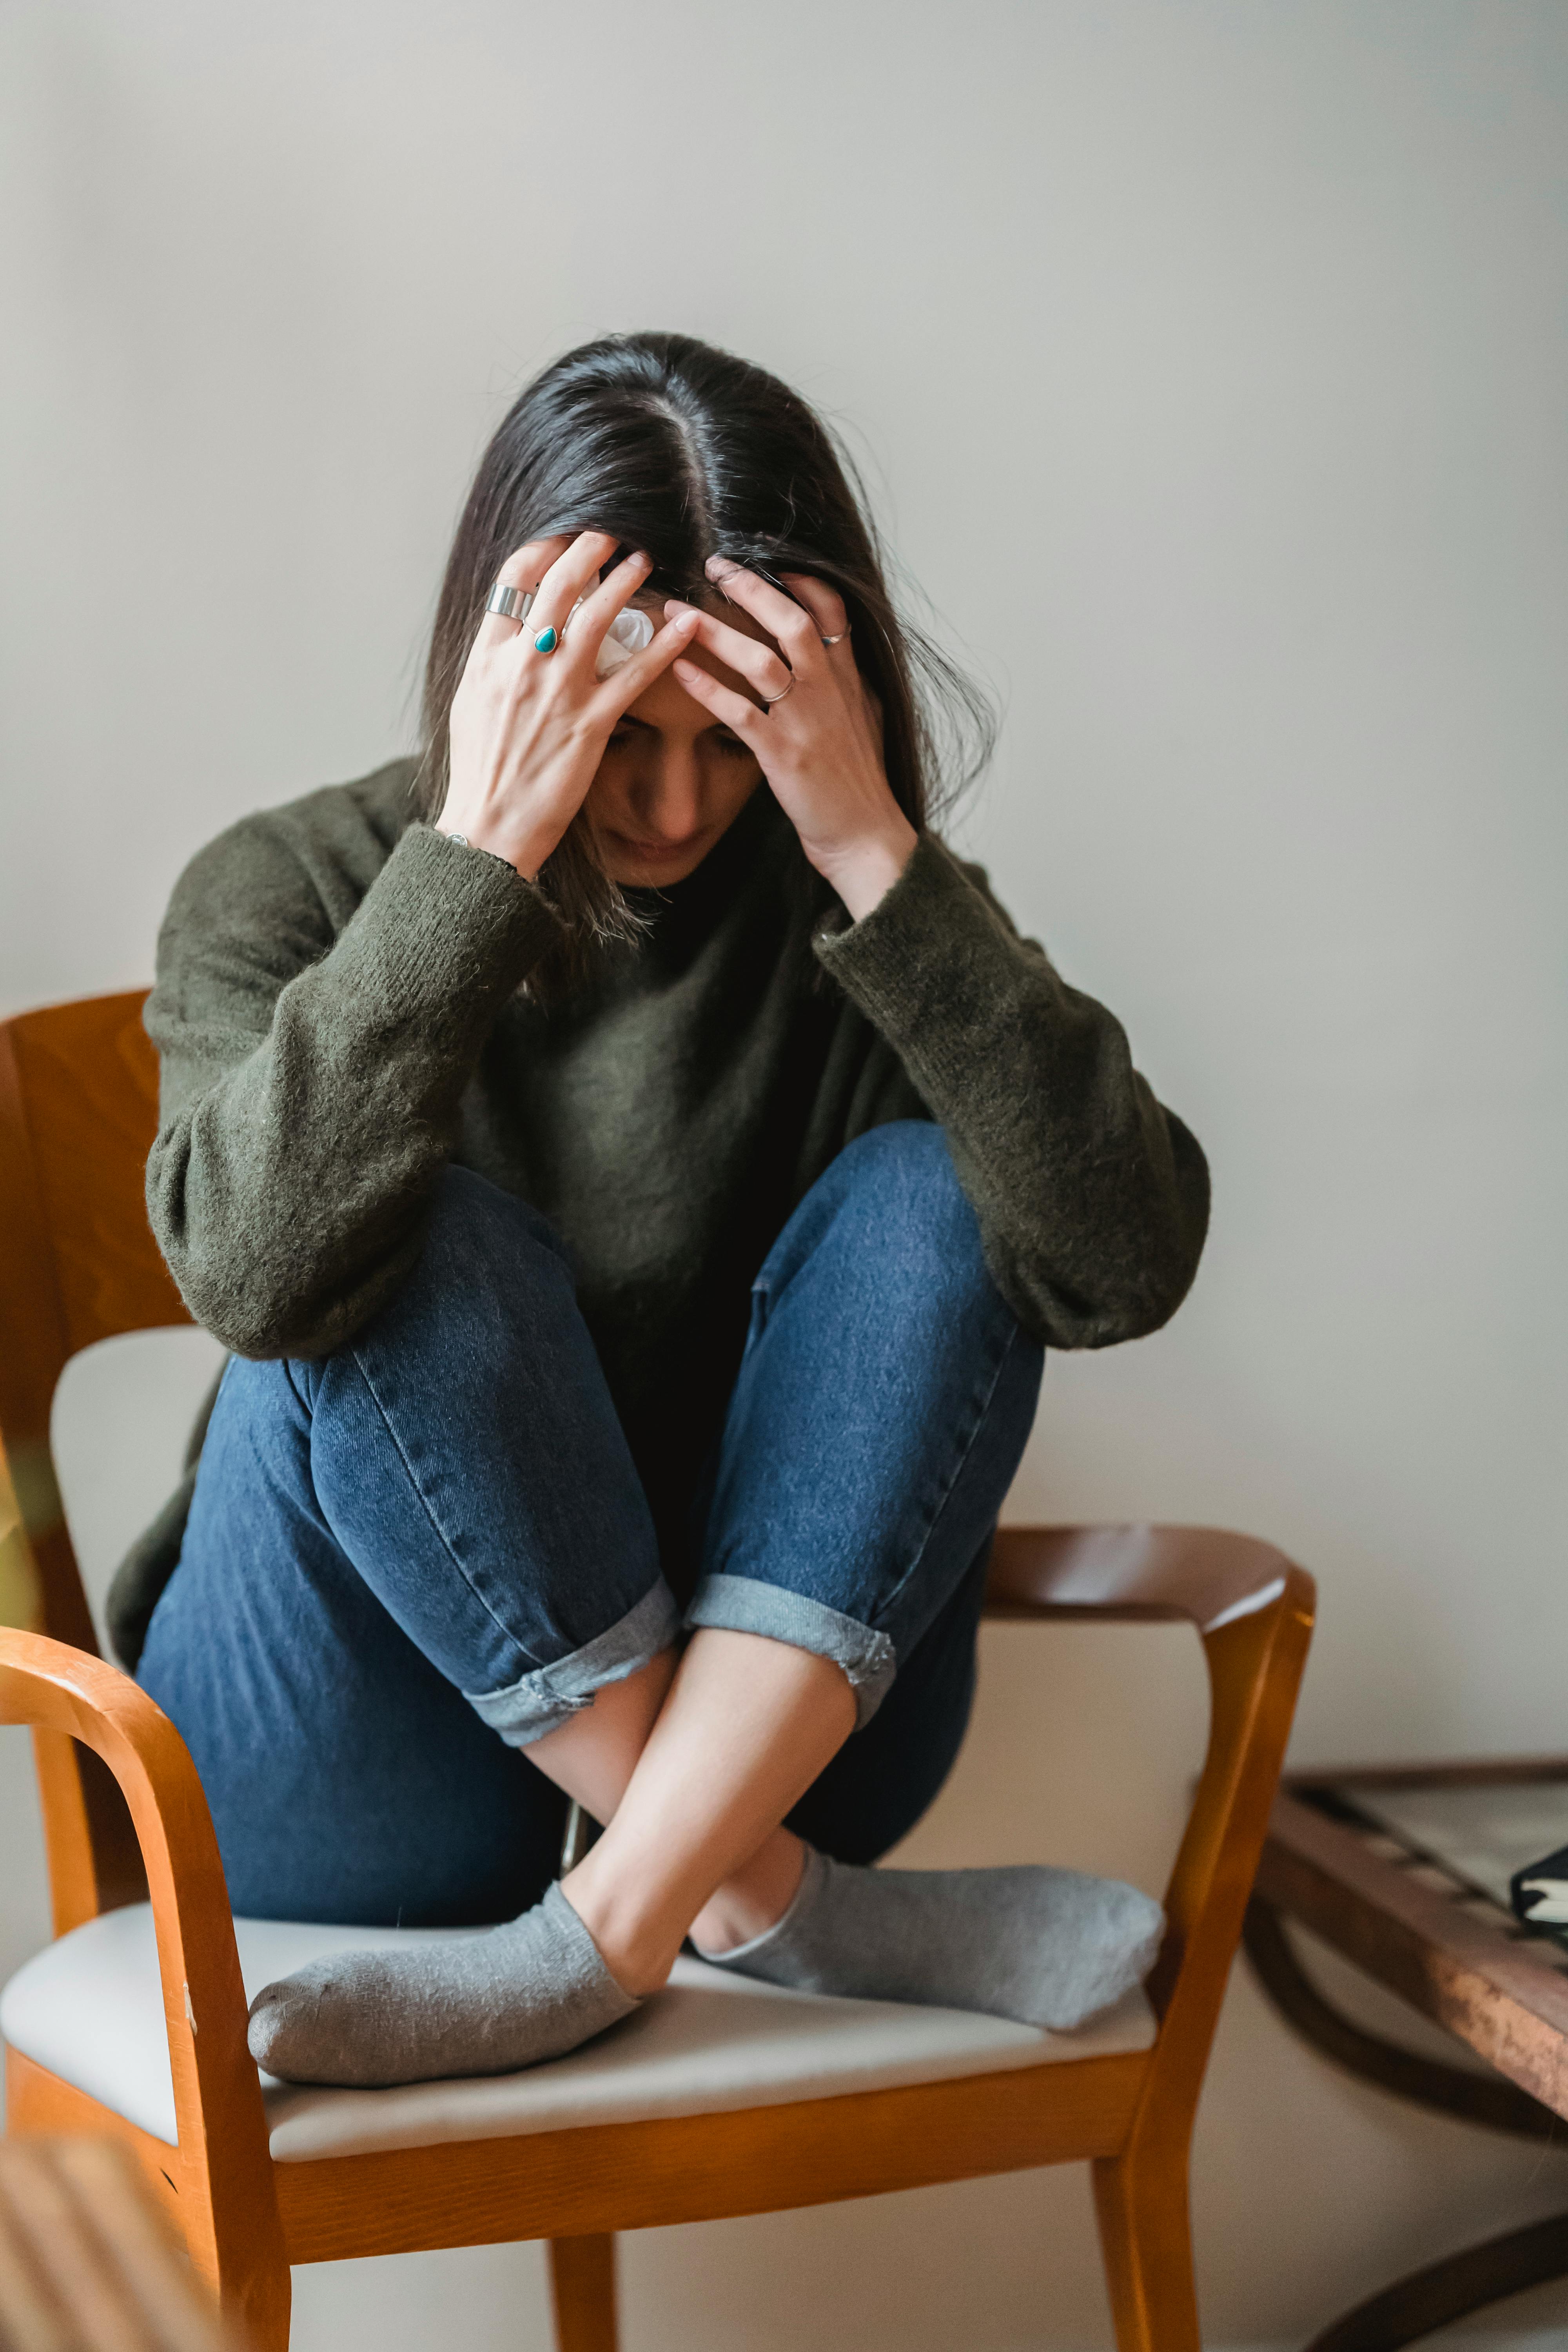 A distressed woman sitting cross-legged on a chair | Source: Pexels